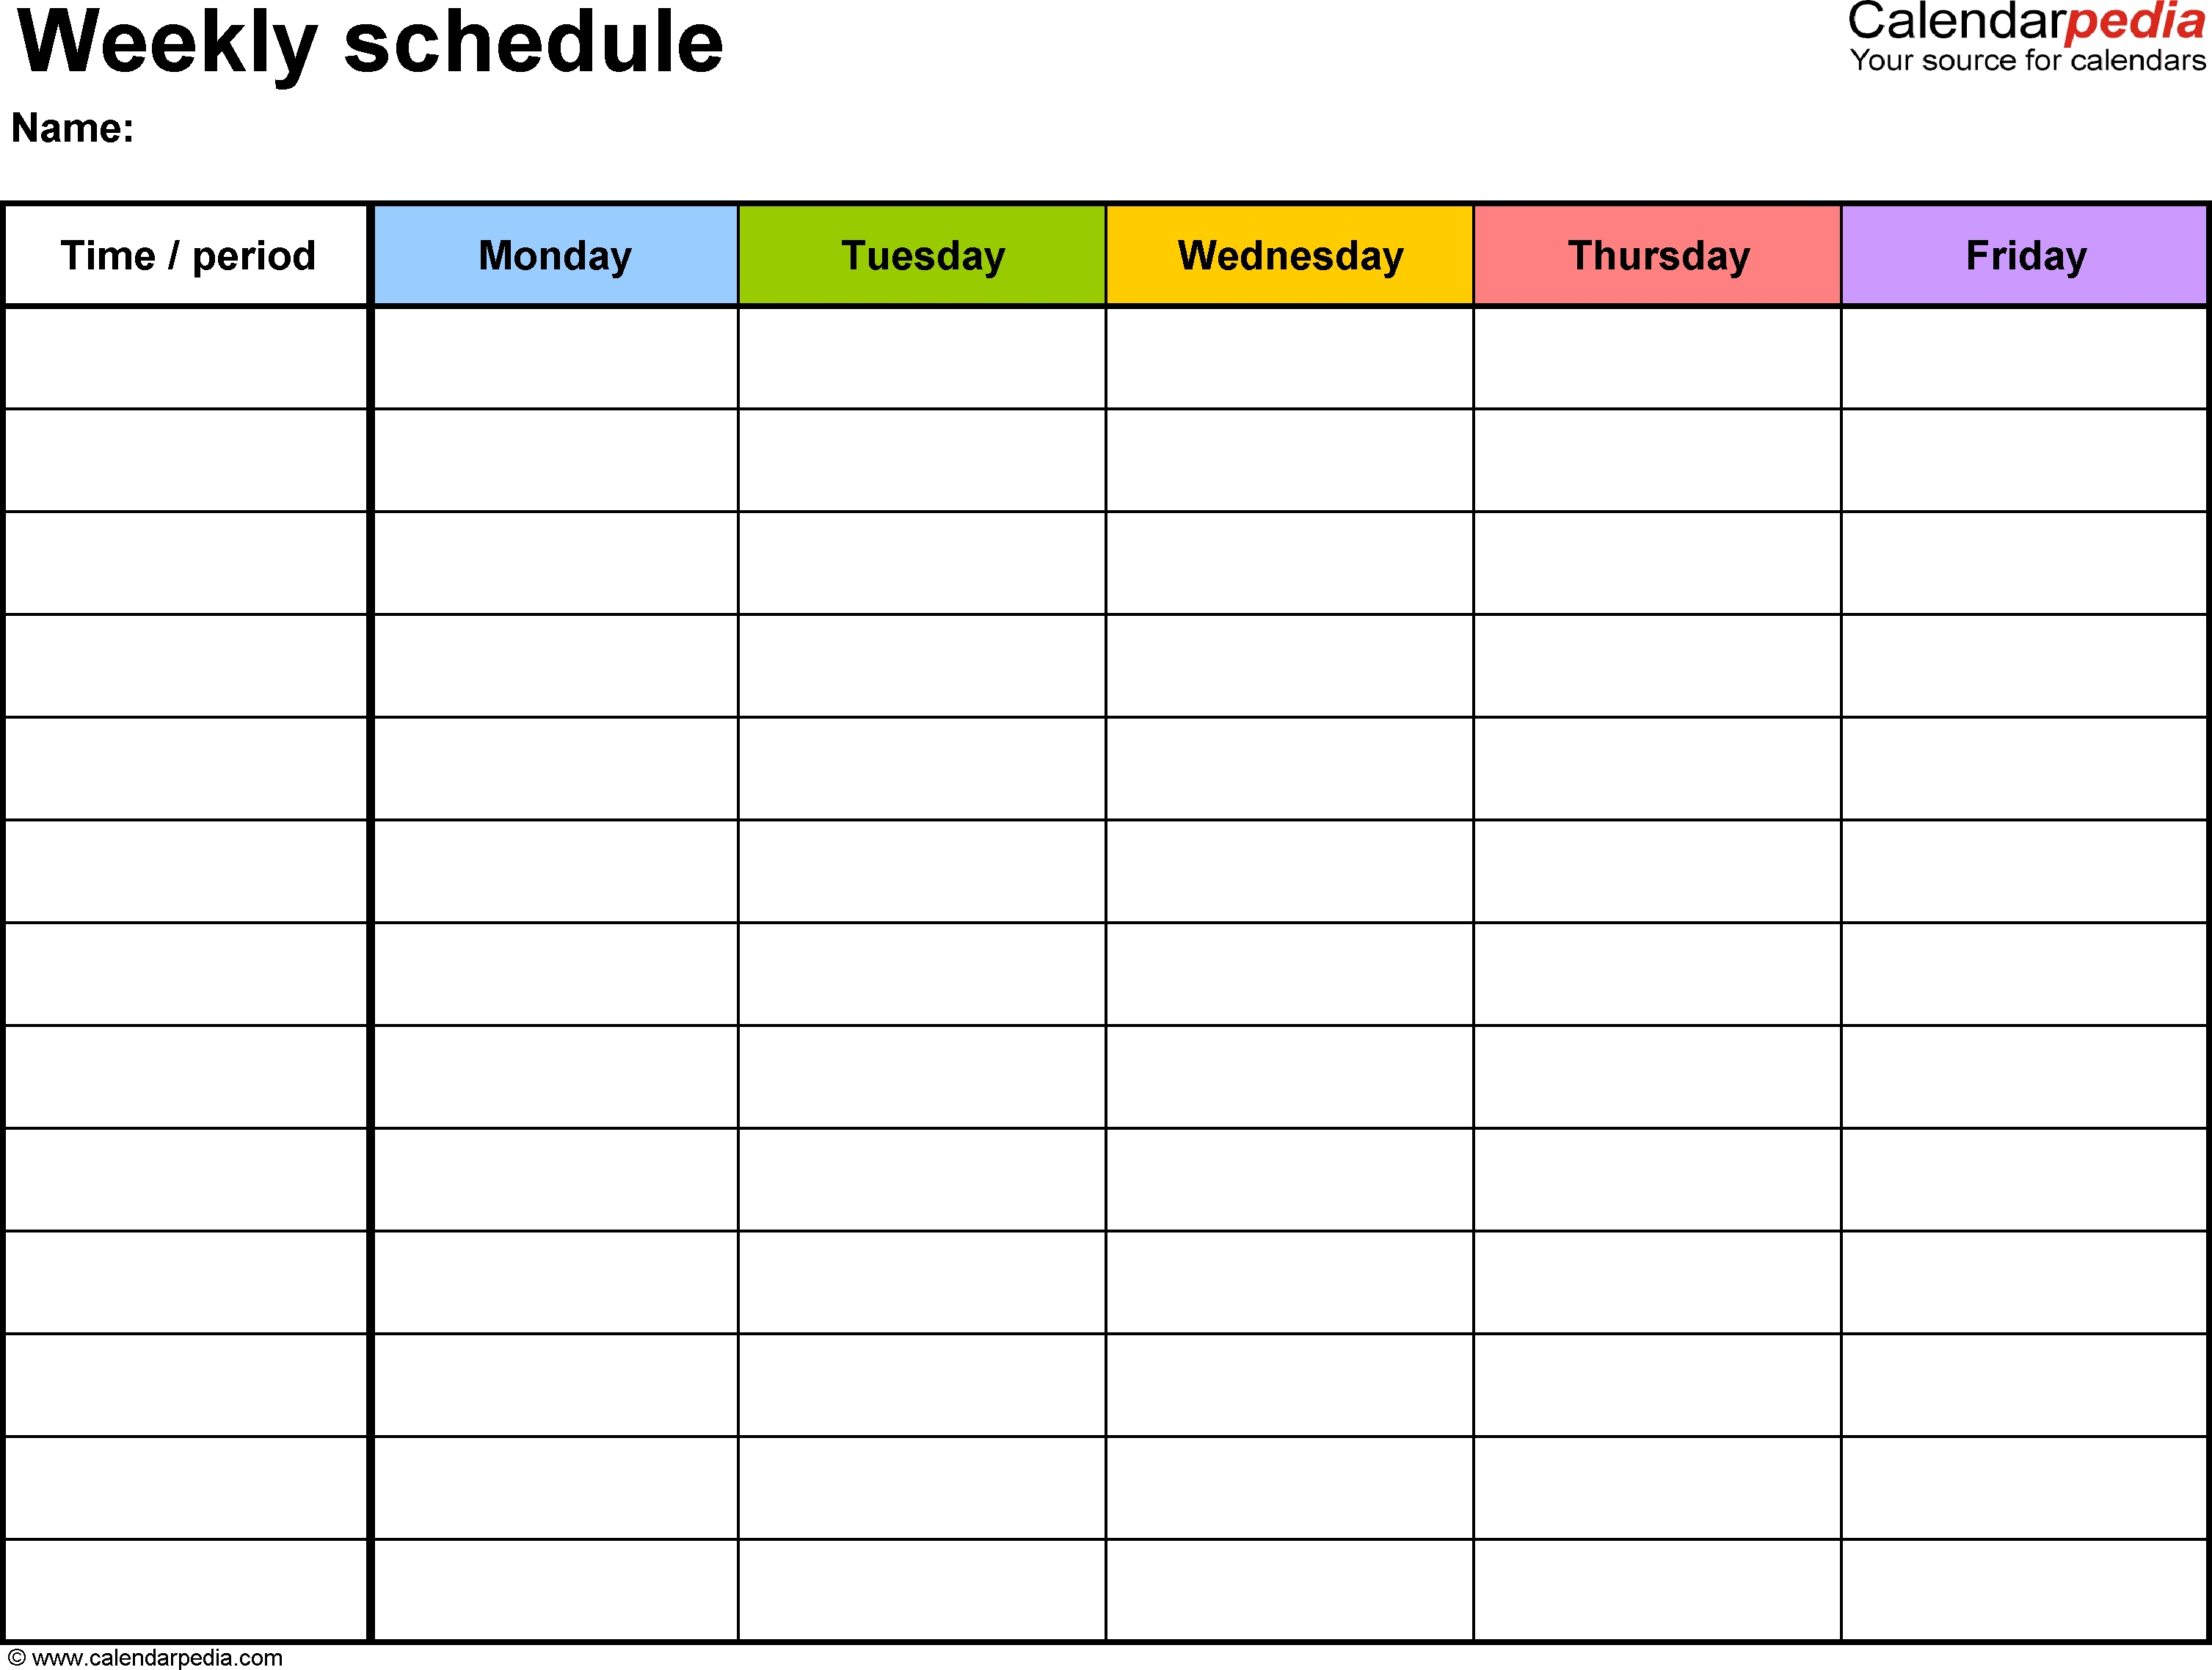 Free Weekly Schedule Templates For Word - 18 Templates-Monday Friday Monthly Calendar Template